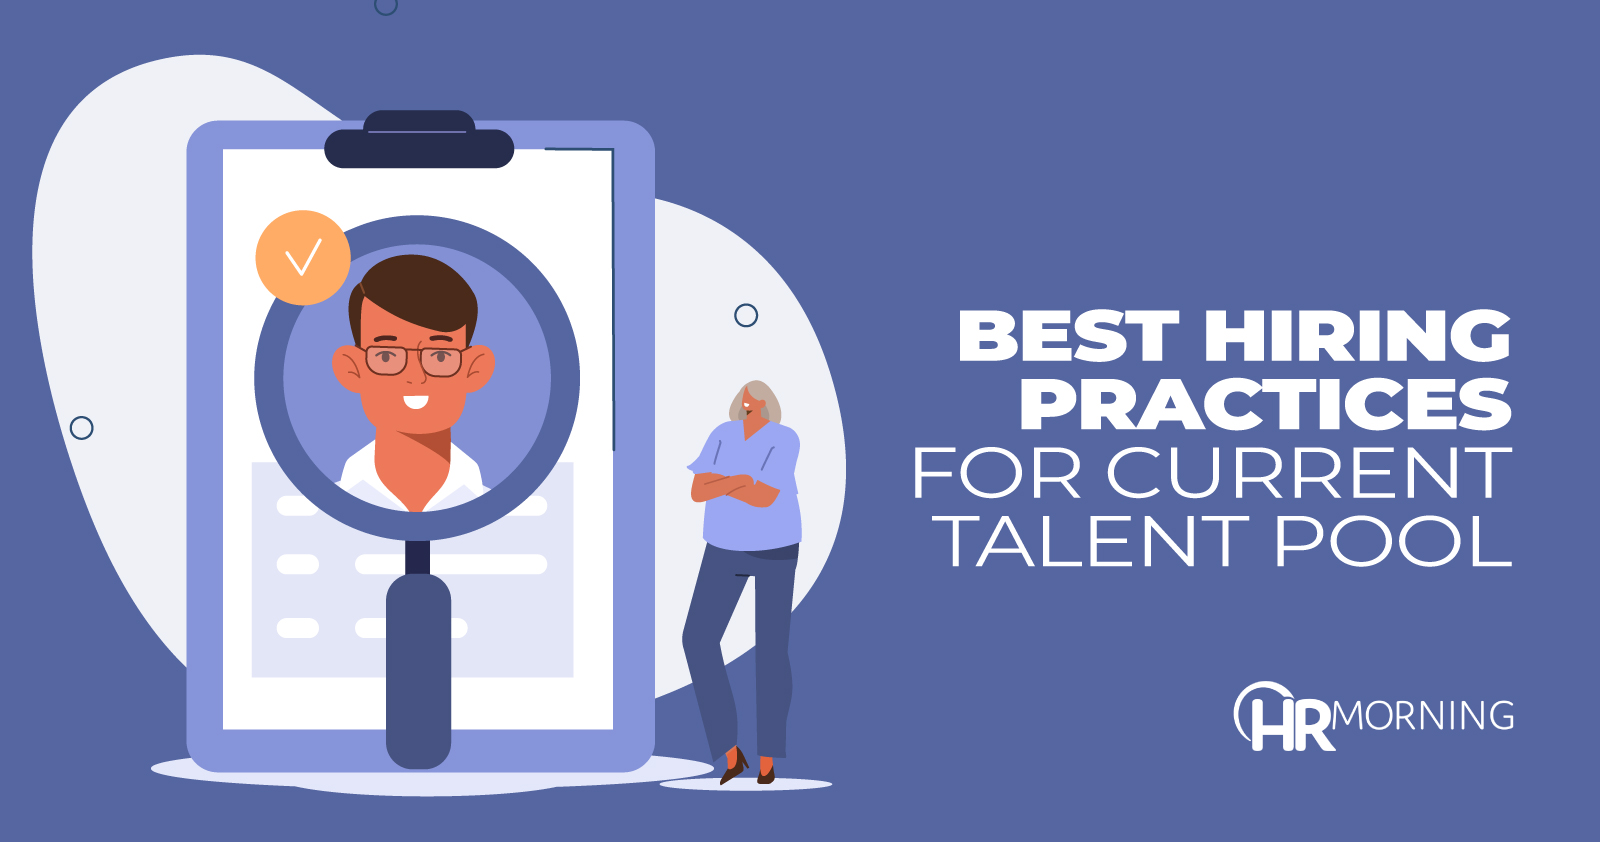 Best hiring practices for current talent pool